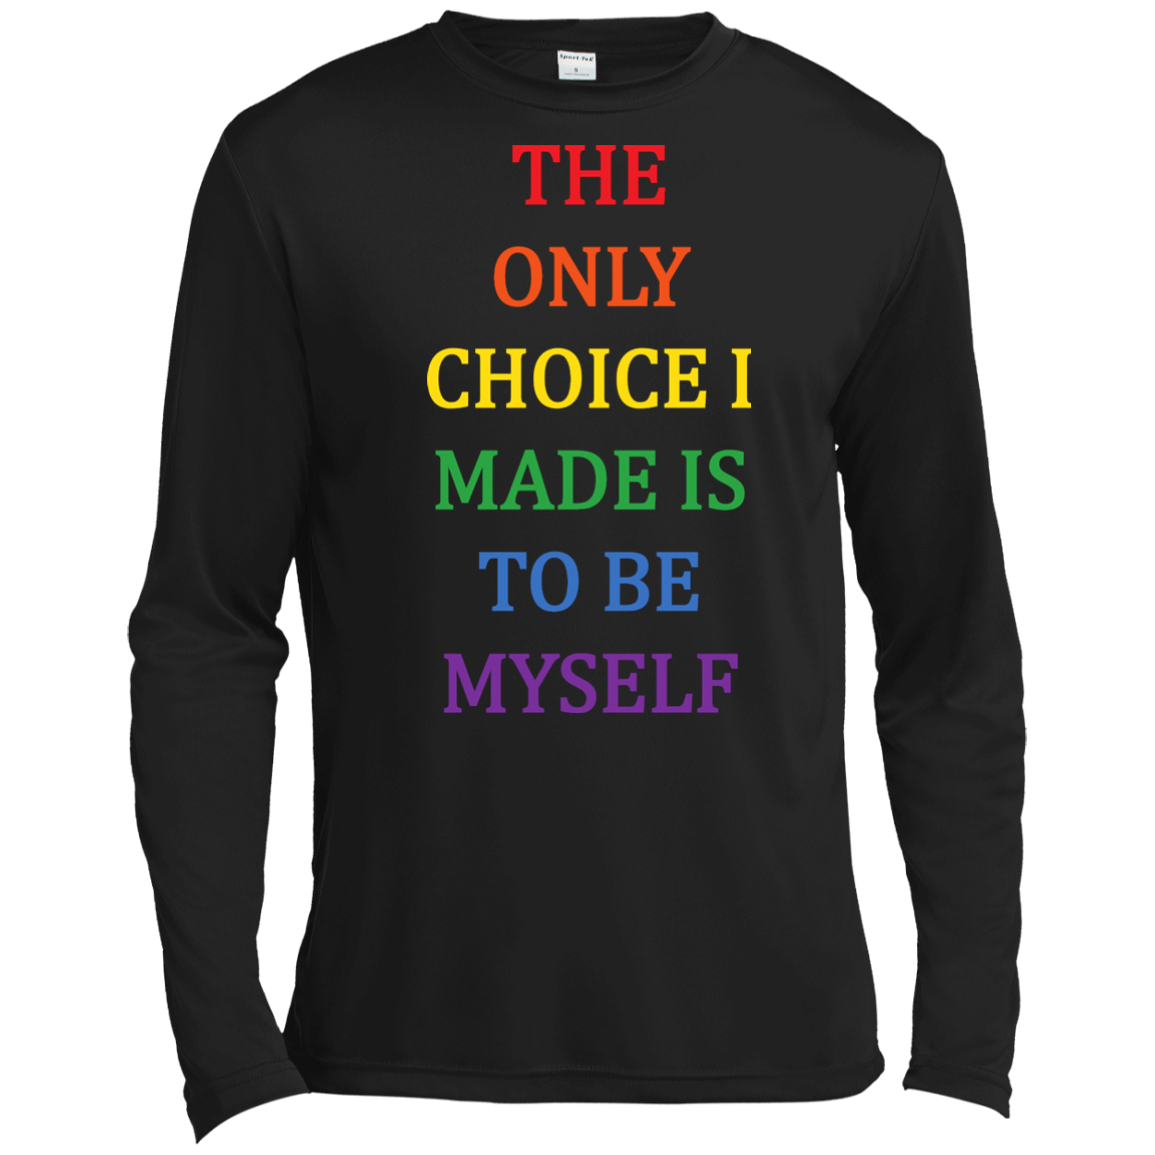 The Only Choice I Made Was To Be Myself